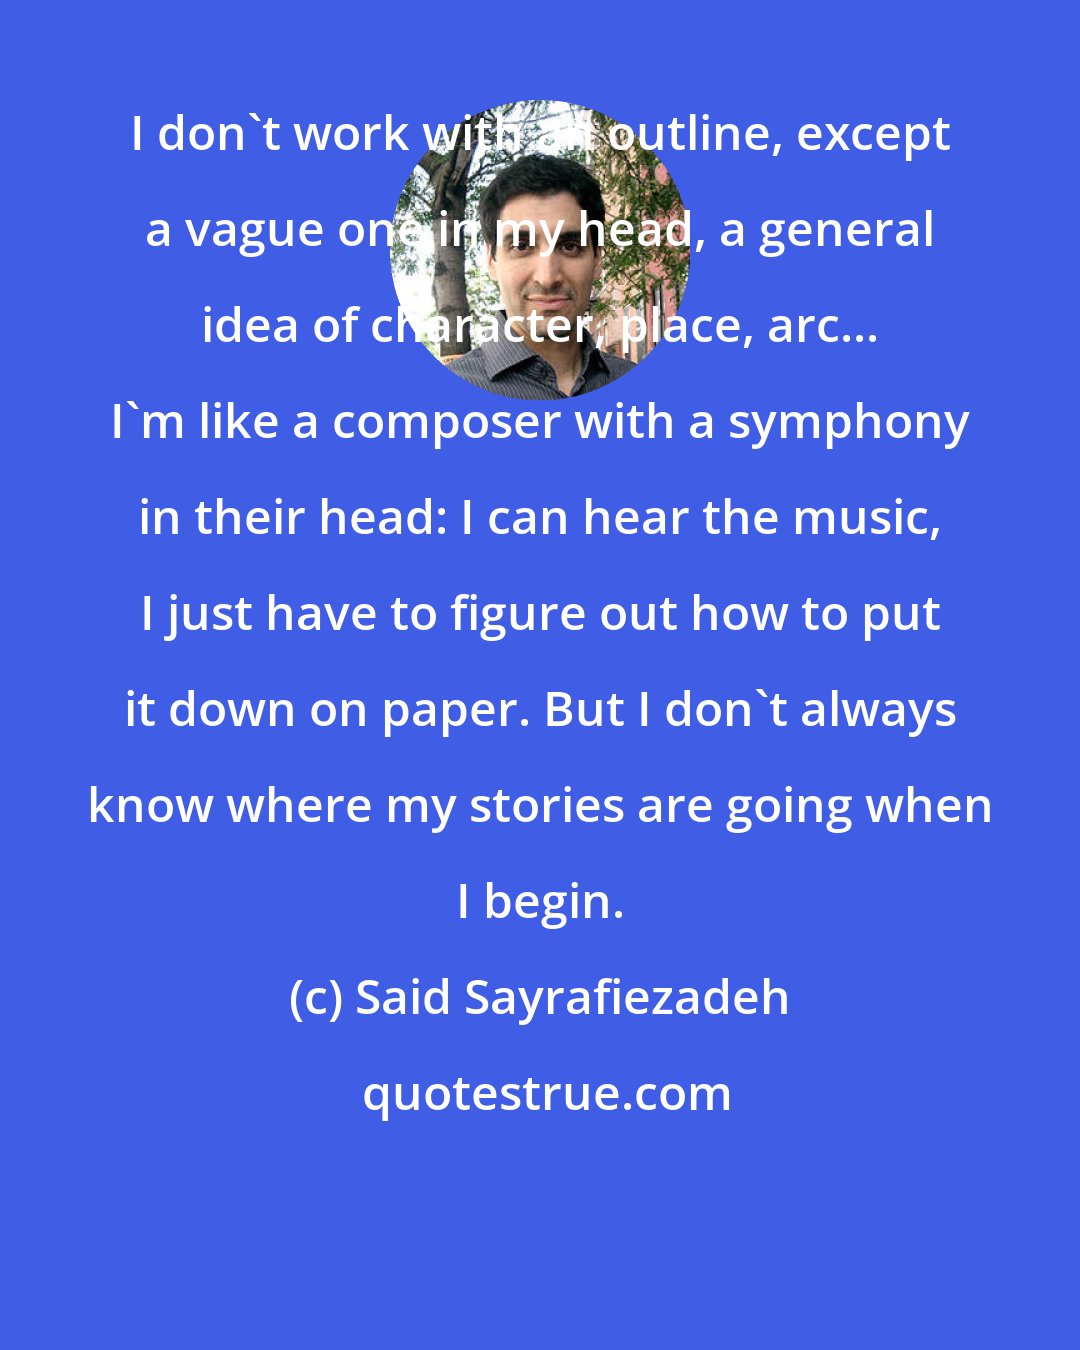 Said Sayrafiezadeh: I don't work with an outline, except a vague one in my head, a general idea of character, place, arc... I'm like a composer with a symphony in their head: I can hear the music, I just have to figure out how to put it down on paper. But I don't always know where my stories are going when I begin.